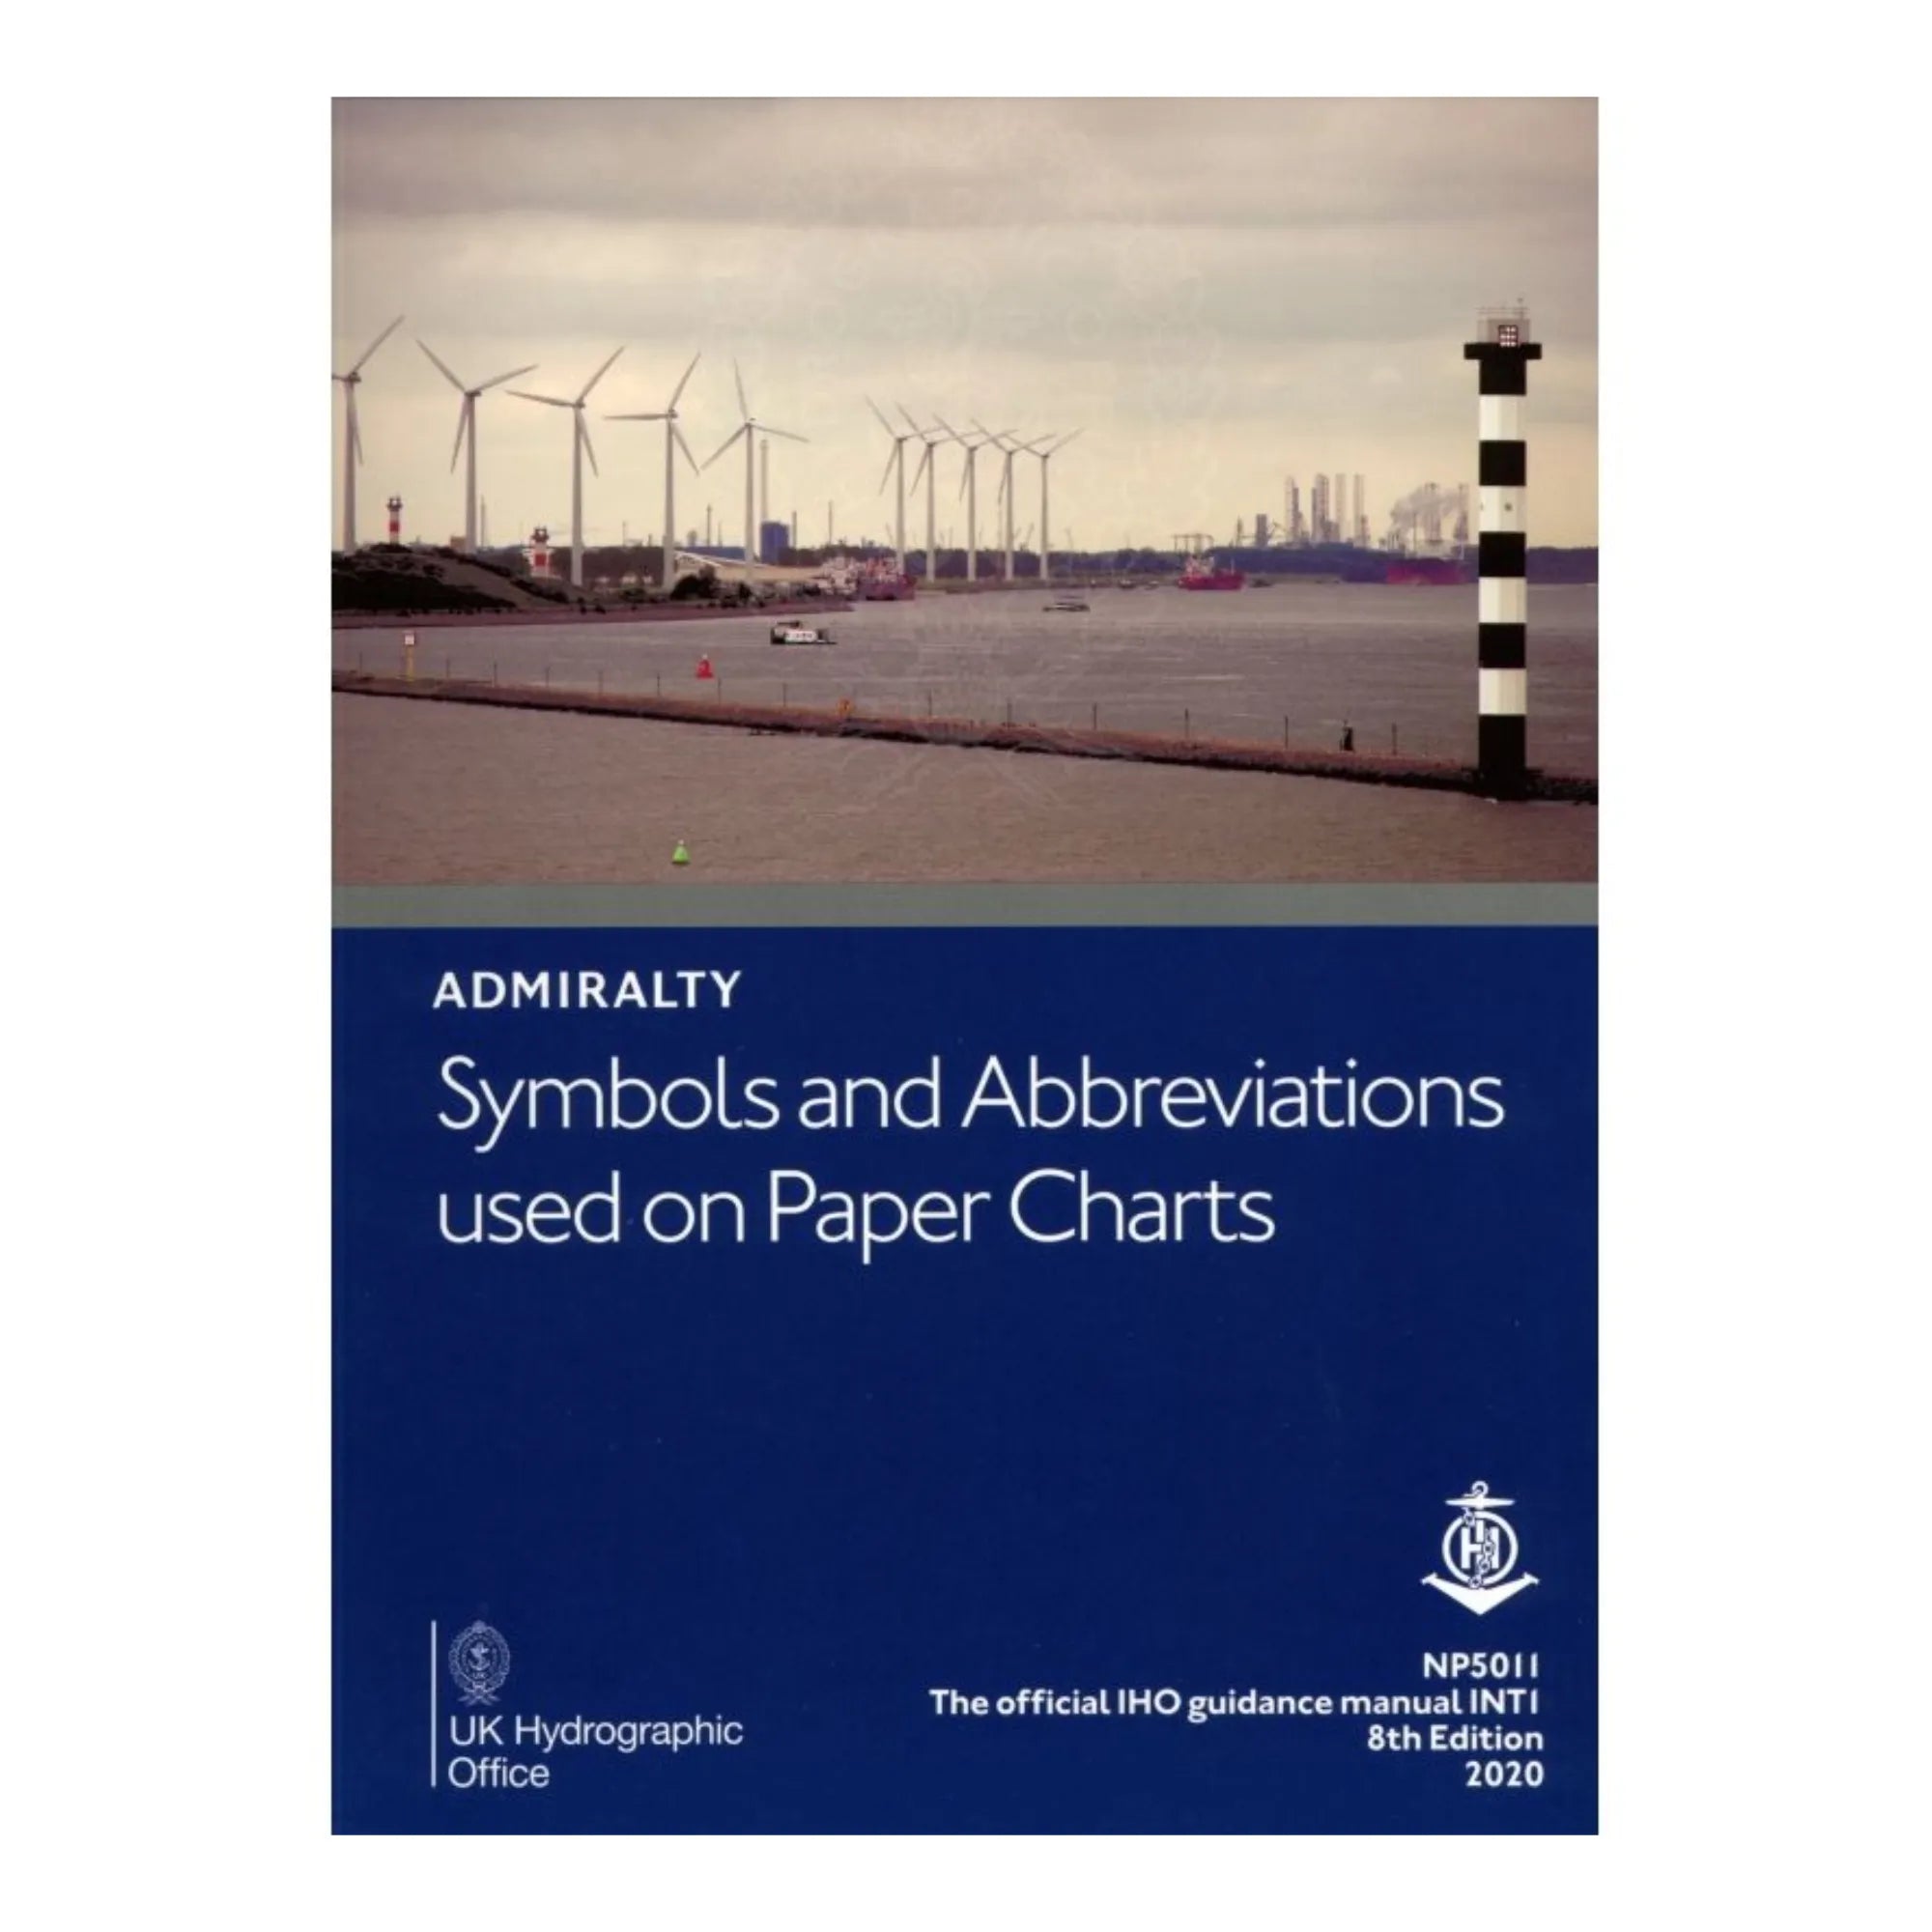 Symbols & Abbreviations used on Admirality Paper Charts (NP5011)